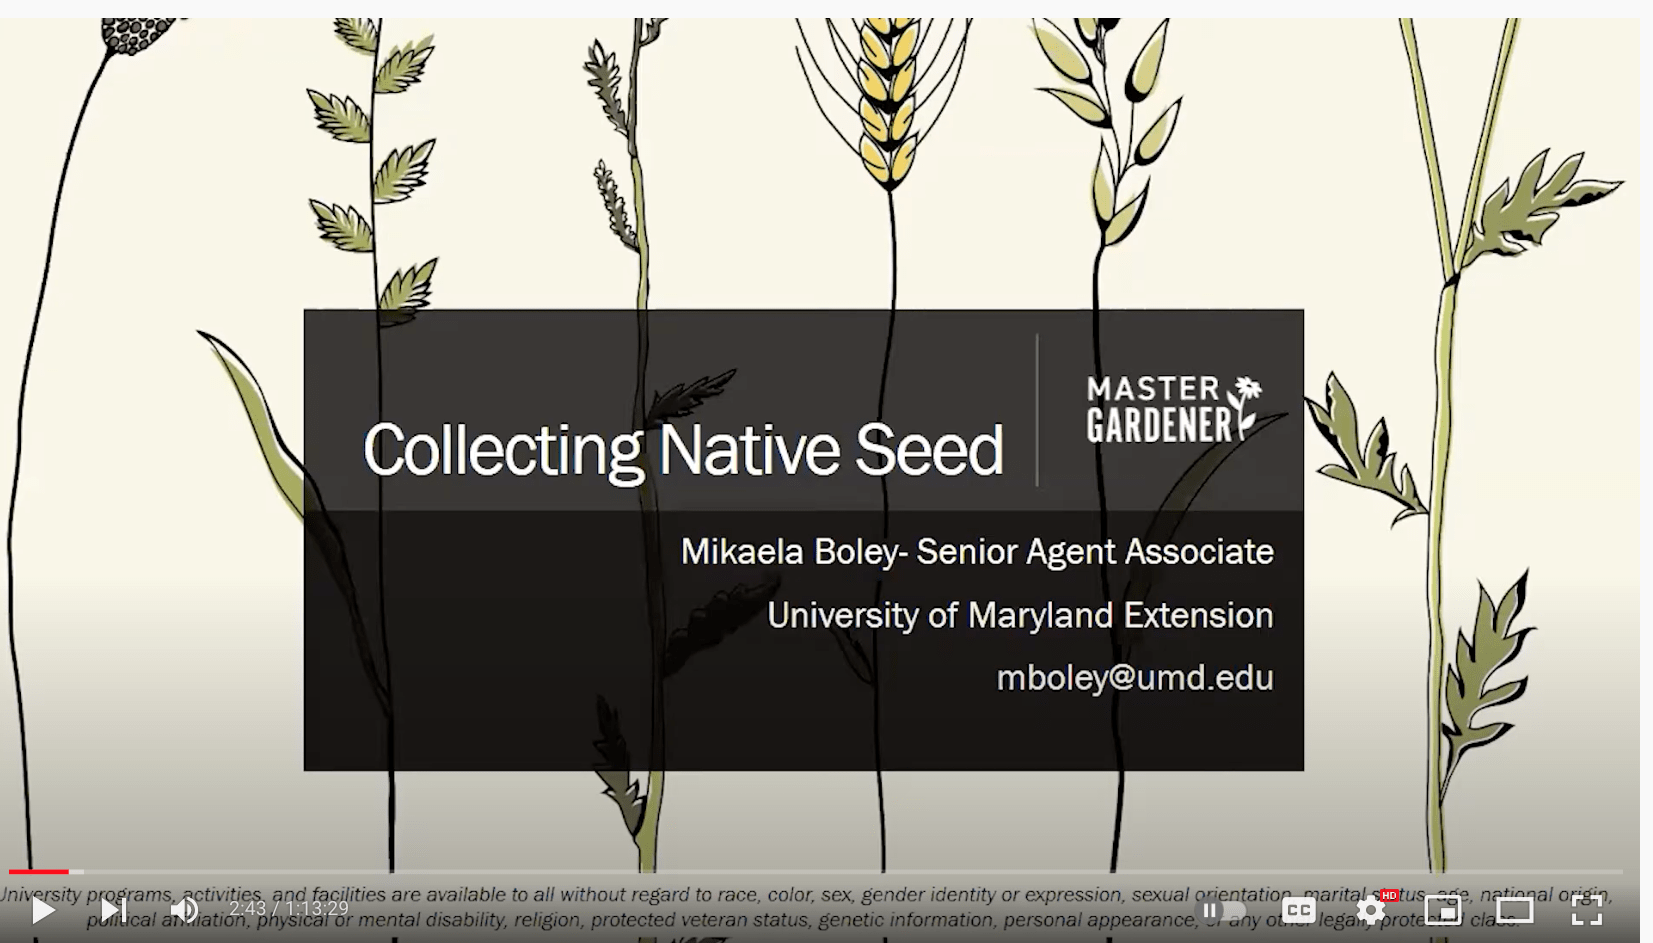 Cover slide from the webinar - collecting native seed